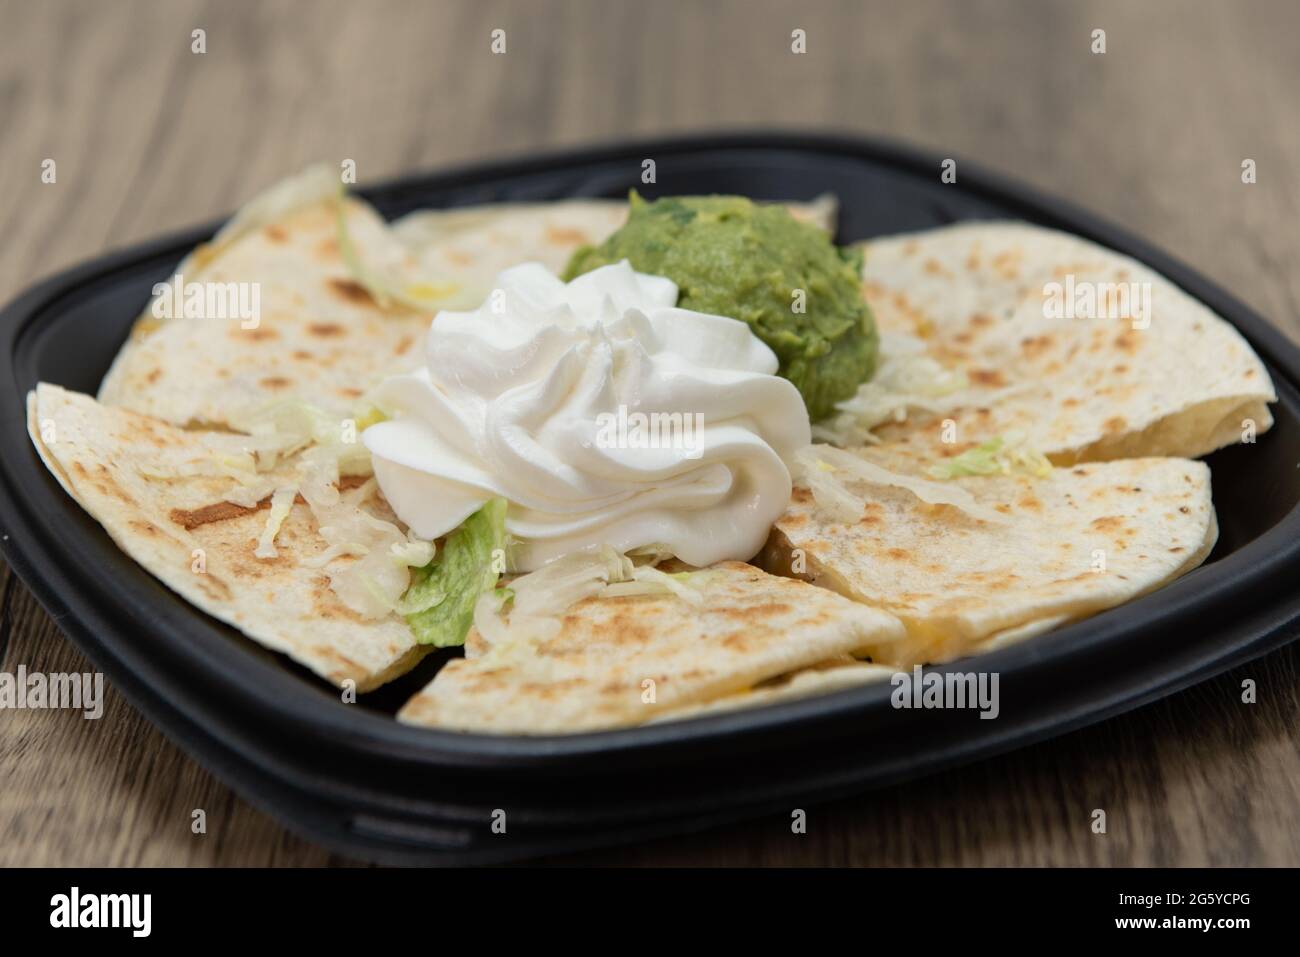 Artistic mound of white sour cream garnishes the tortilla quesadilla meal. Stock Photo